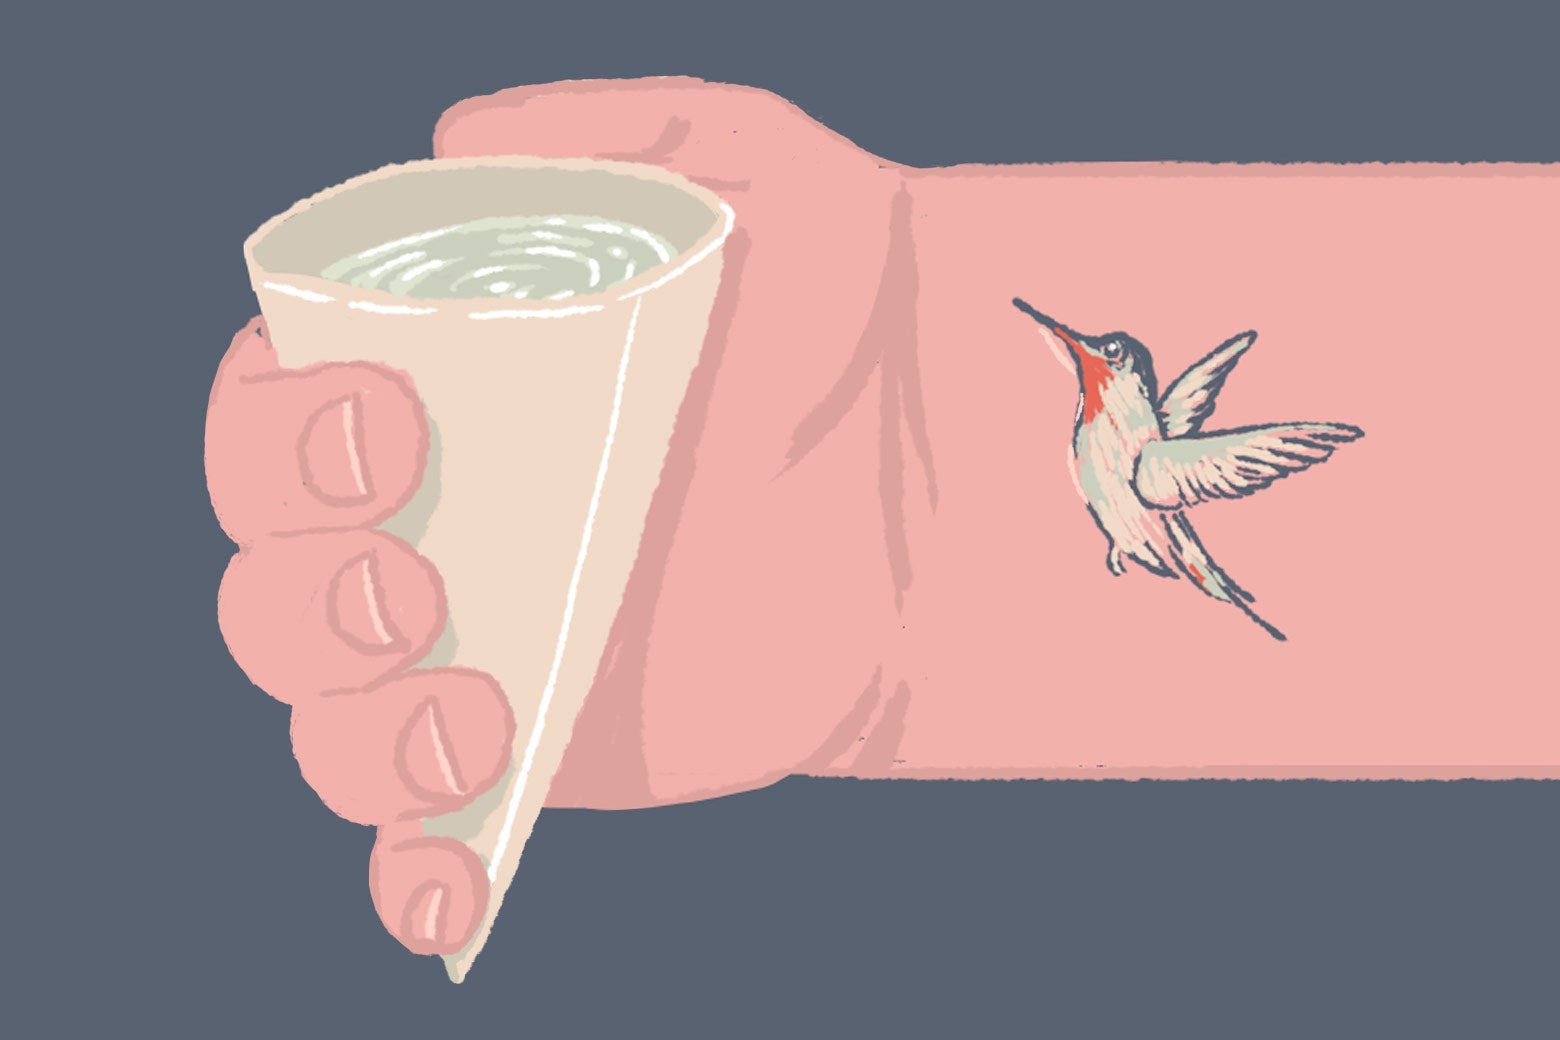 A hand—whose forearm has a hummingbird tattoo—holding a watercooler cup